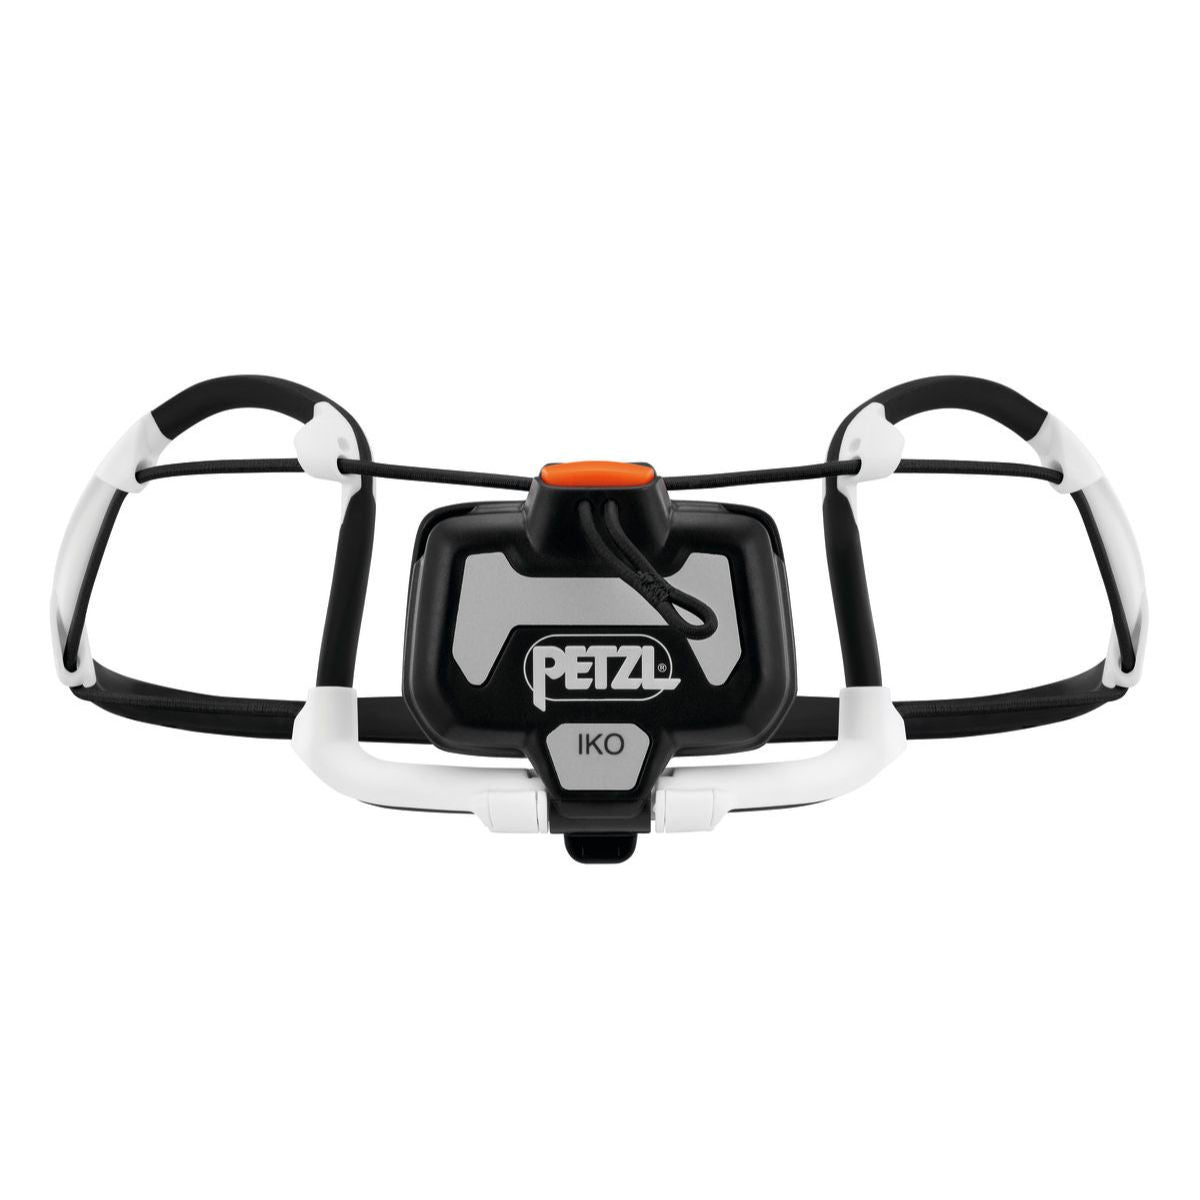 Petzl IKO in white and black rear battery pack